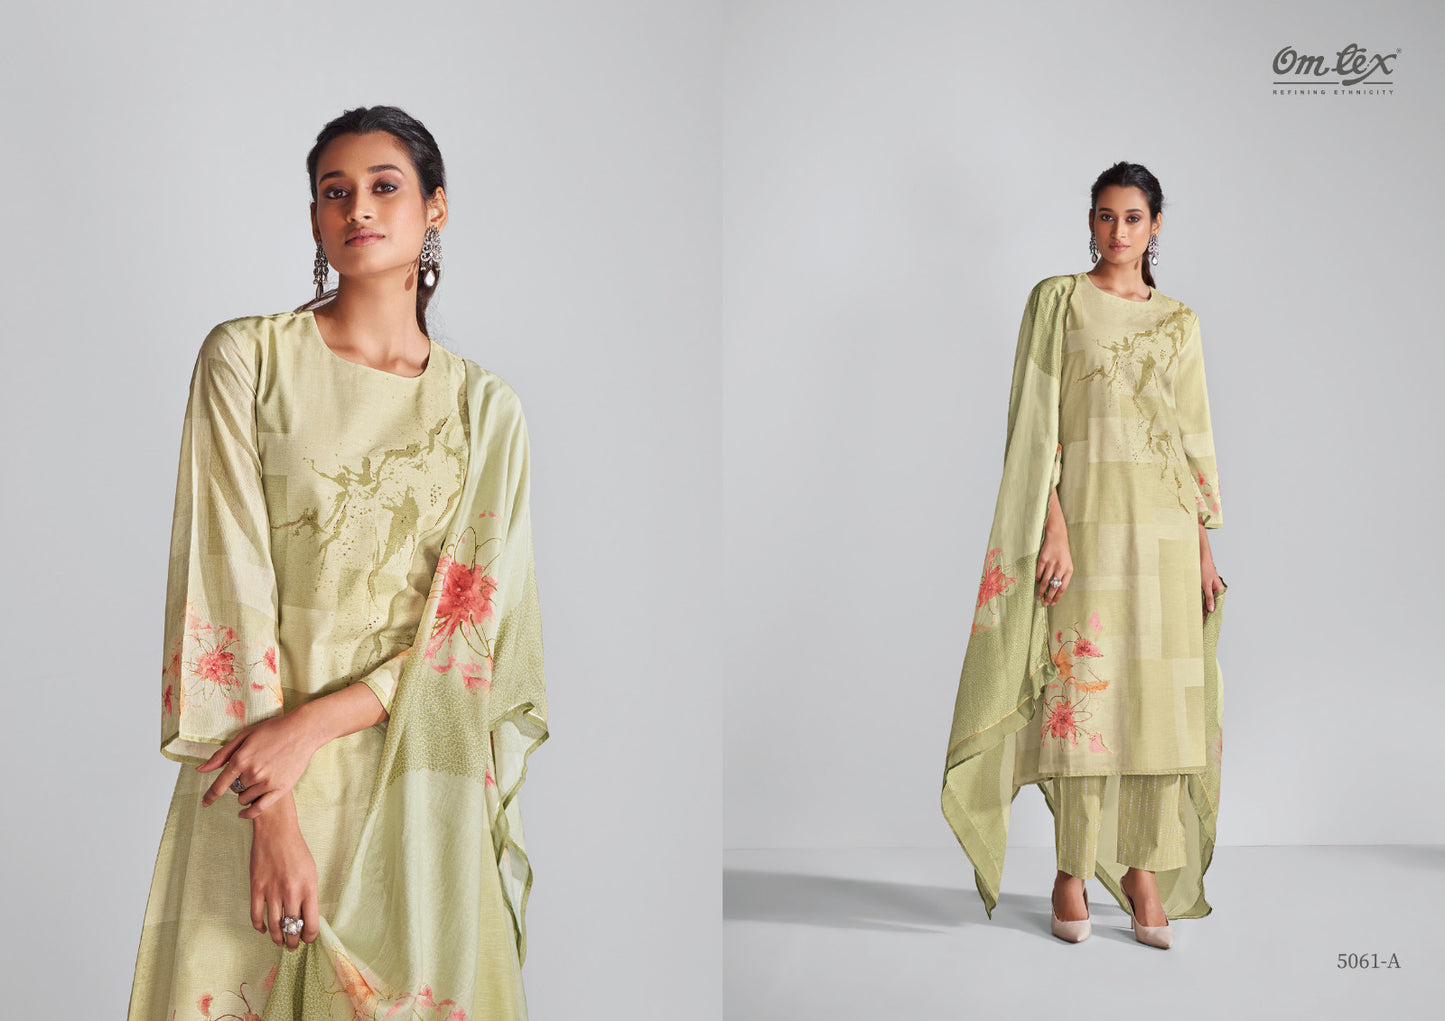 Nitara Omtex Lawn Cotton Pant Style Suits